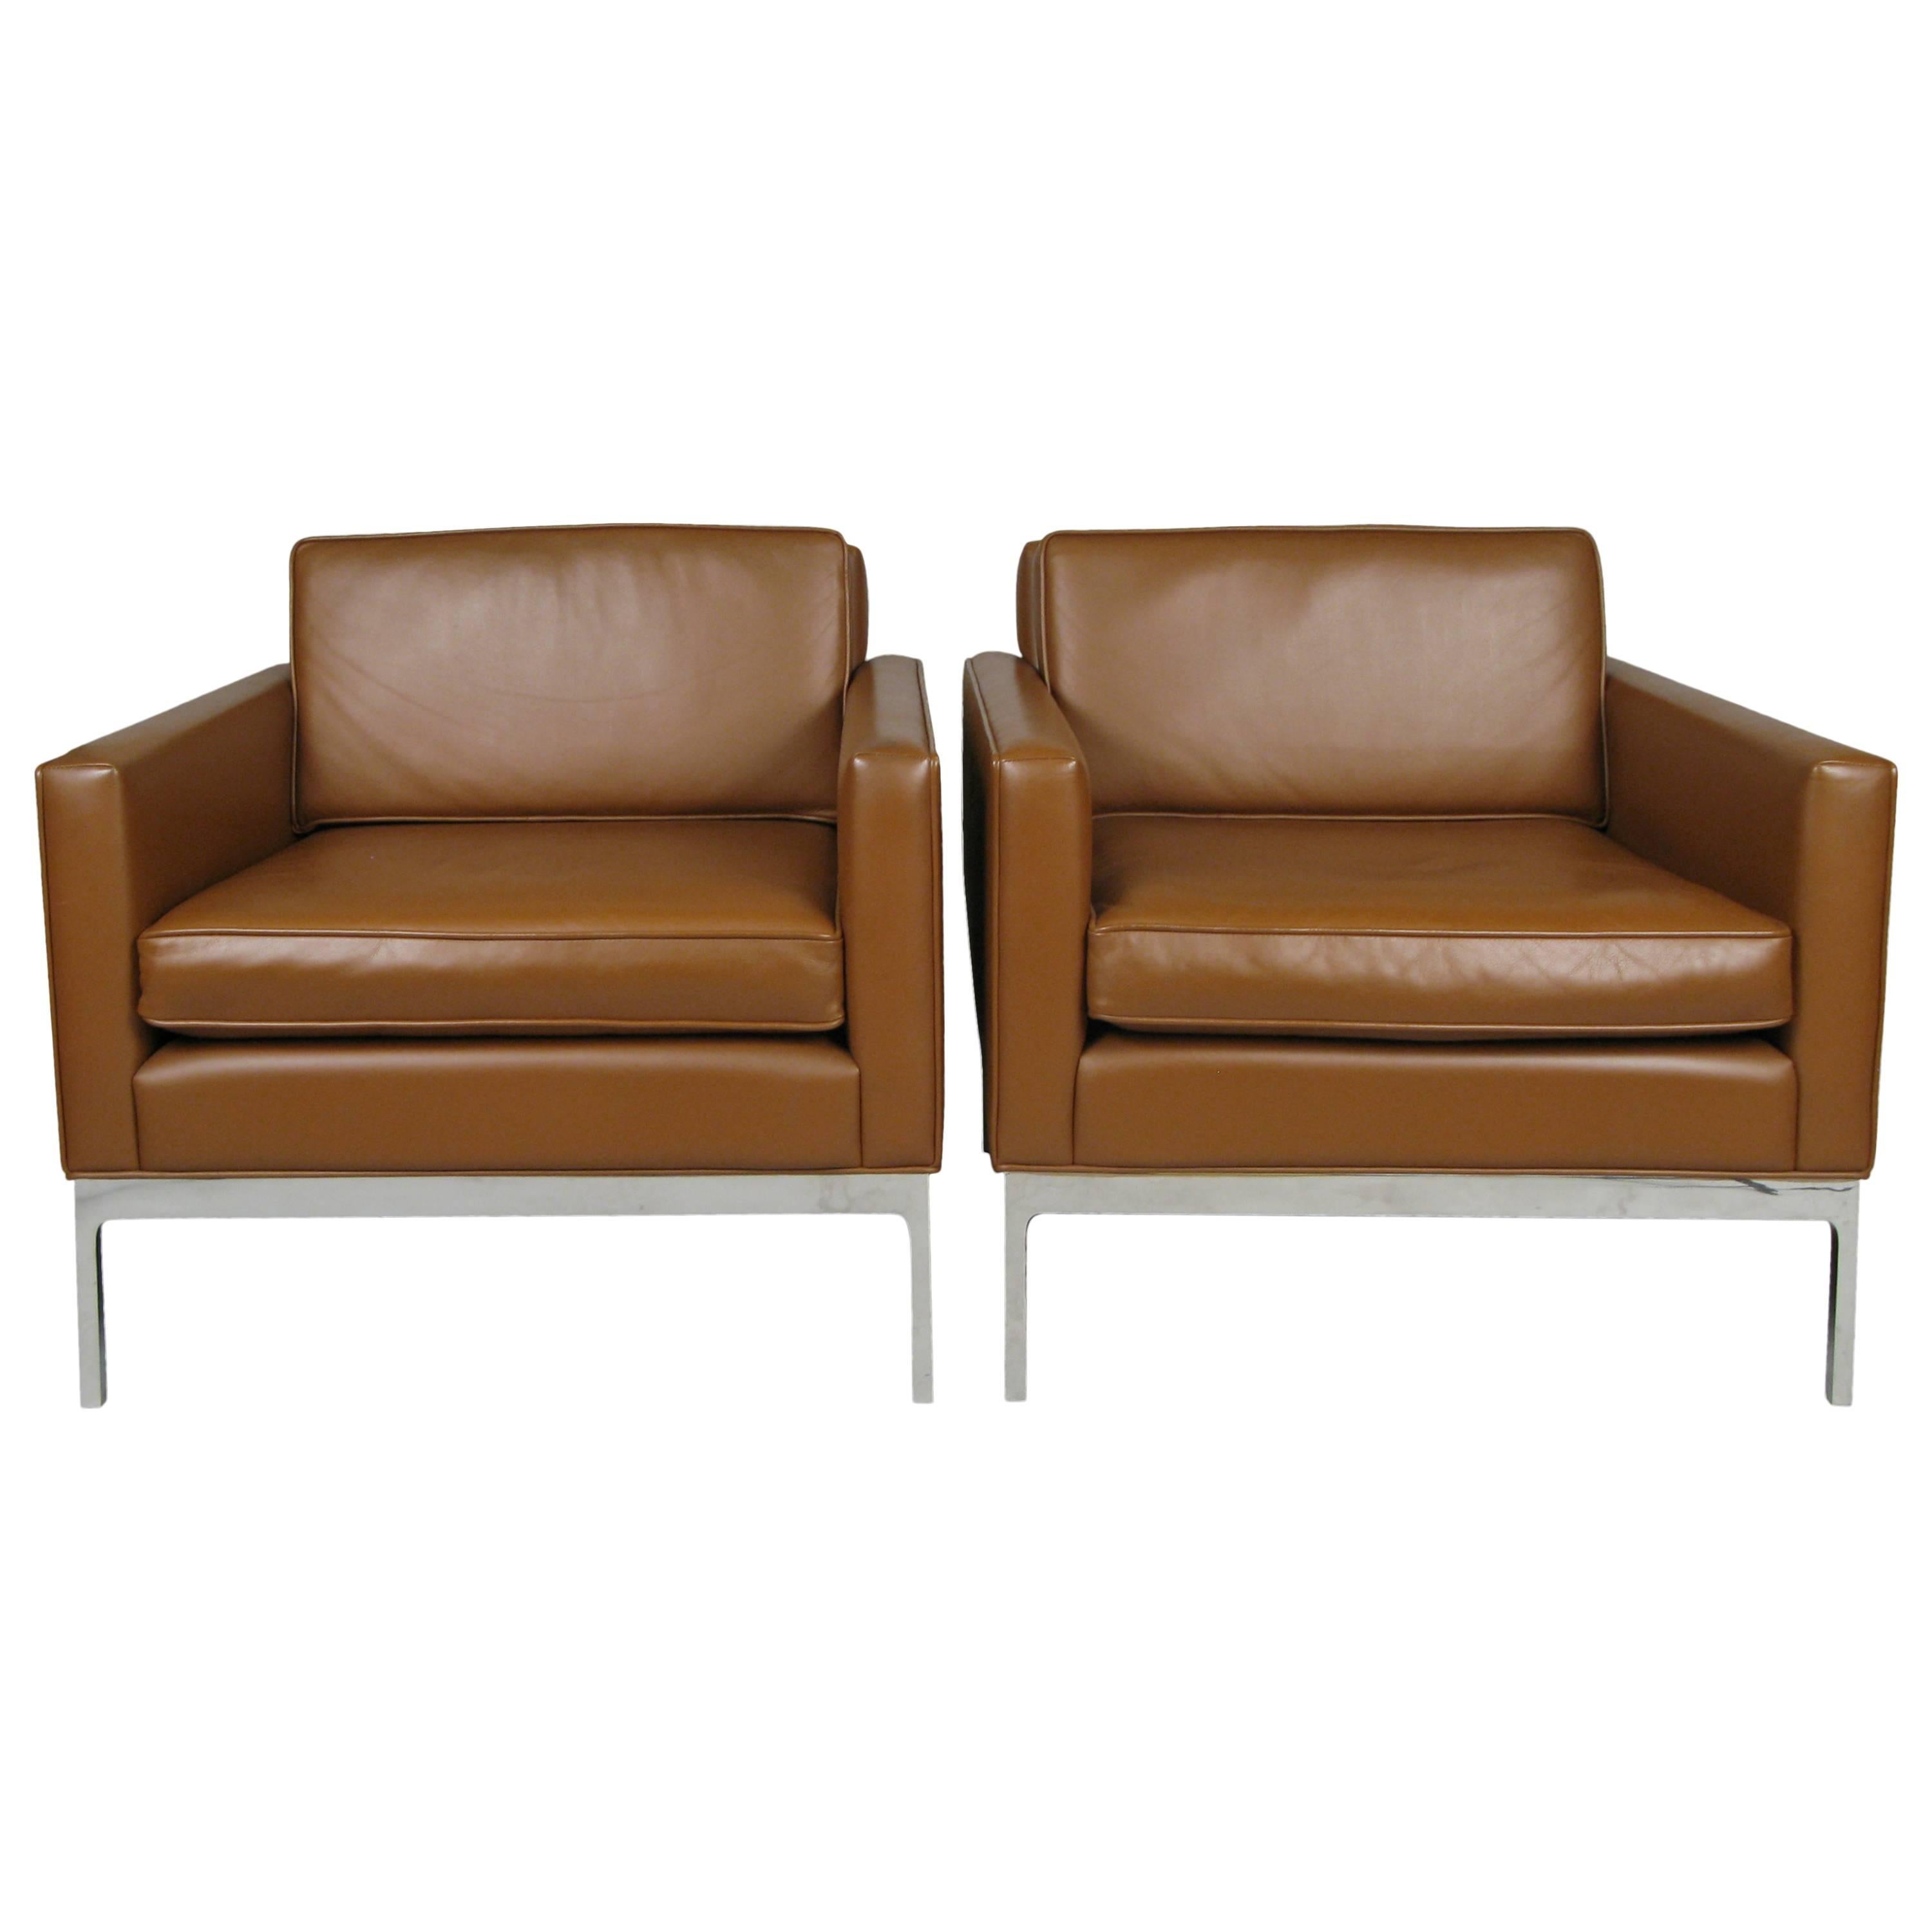 Pair of Leather and Polished Steel Lounge Chairs by Nicos Zographos